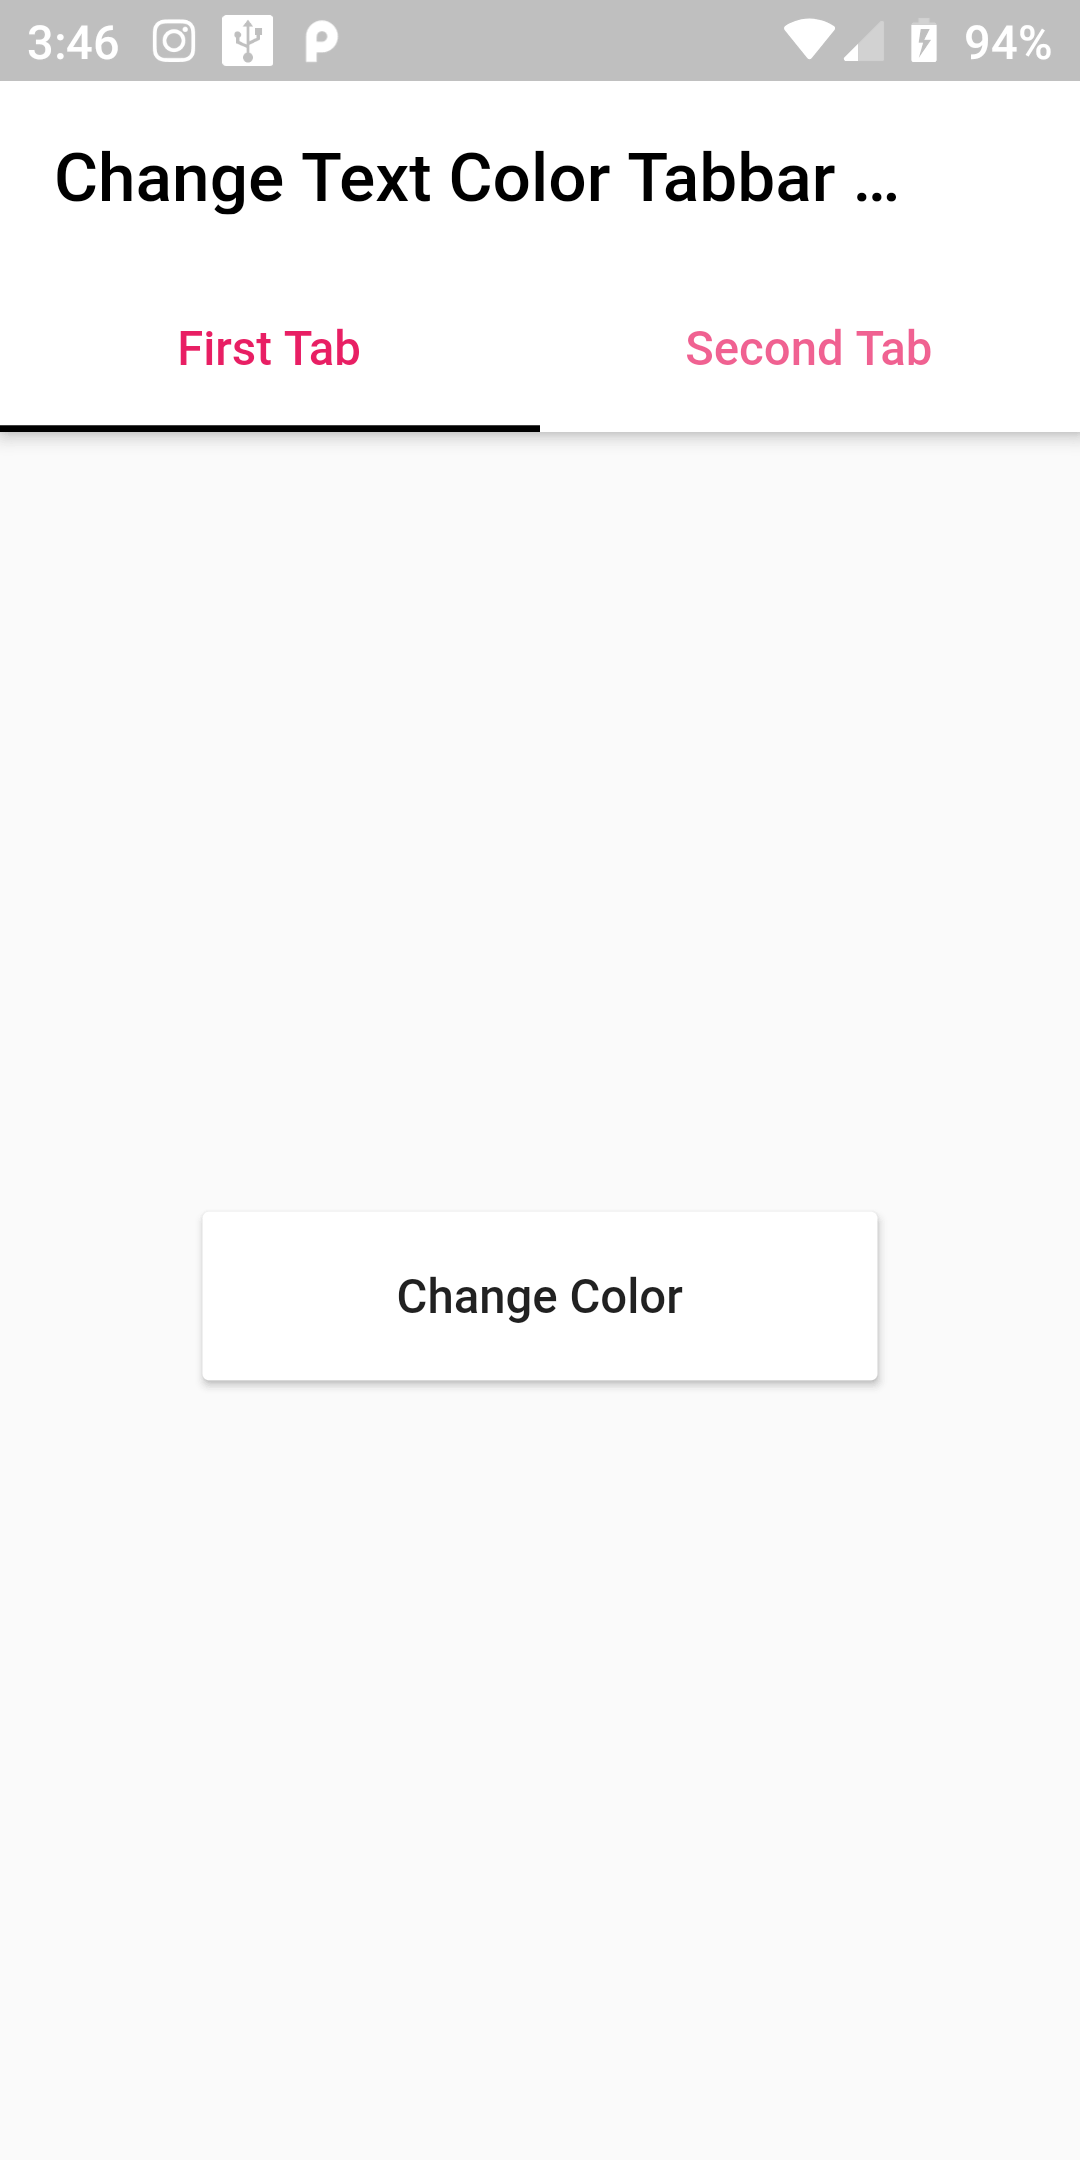 How To Change Tabbar Text Color In Flutter Android App